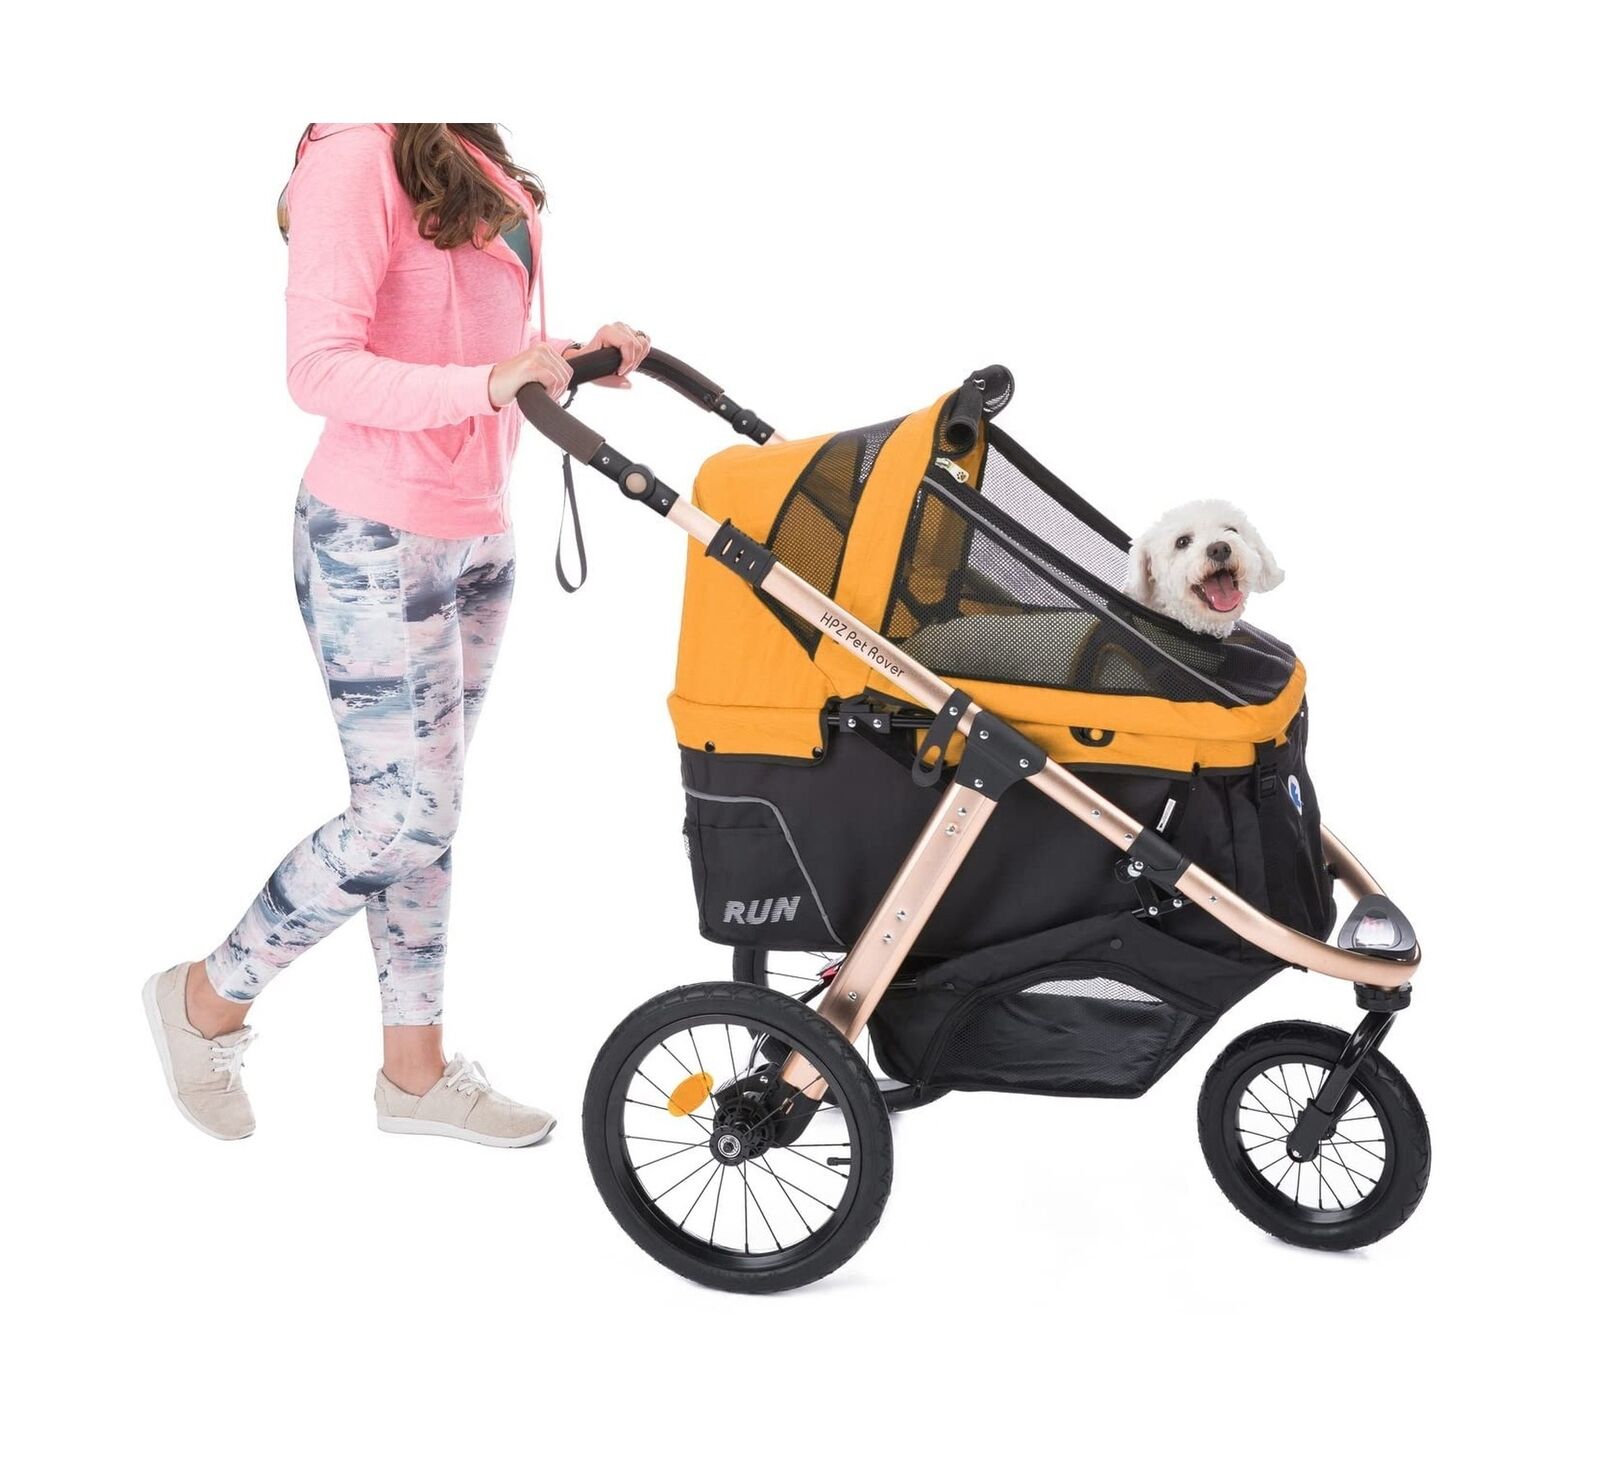 HPZ Pet Rover Run Performance Jogging Sports Stroller with Comfort Rubber Whe...